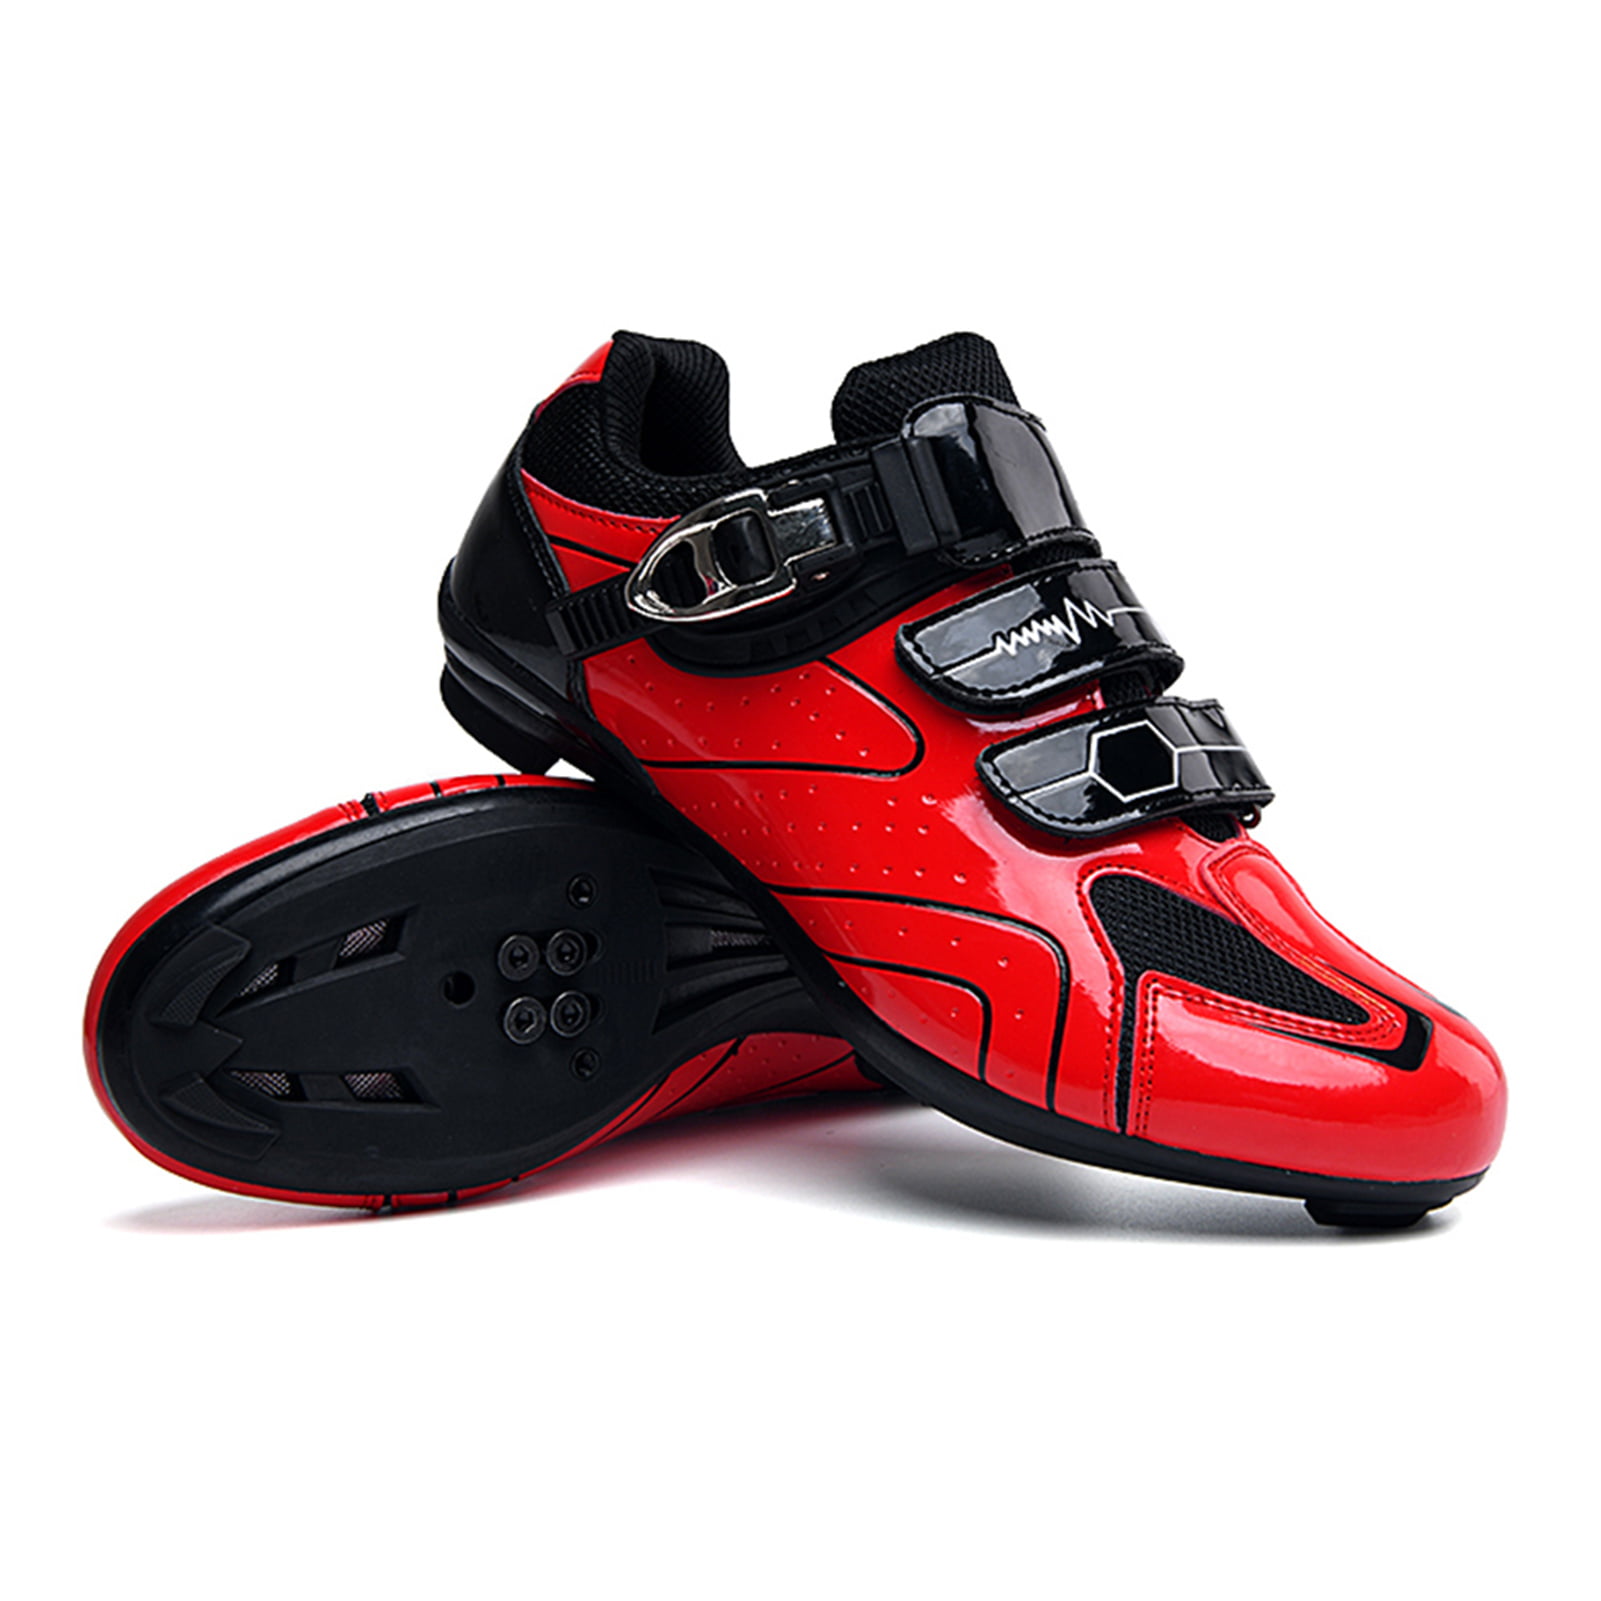 Details about   MTB Cycling Shoes Mens Professional Racing Road SPD Pedal Bike Bicycle Sneakers 